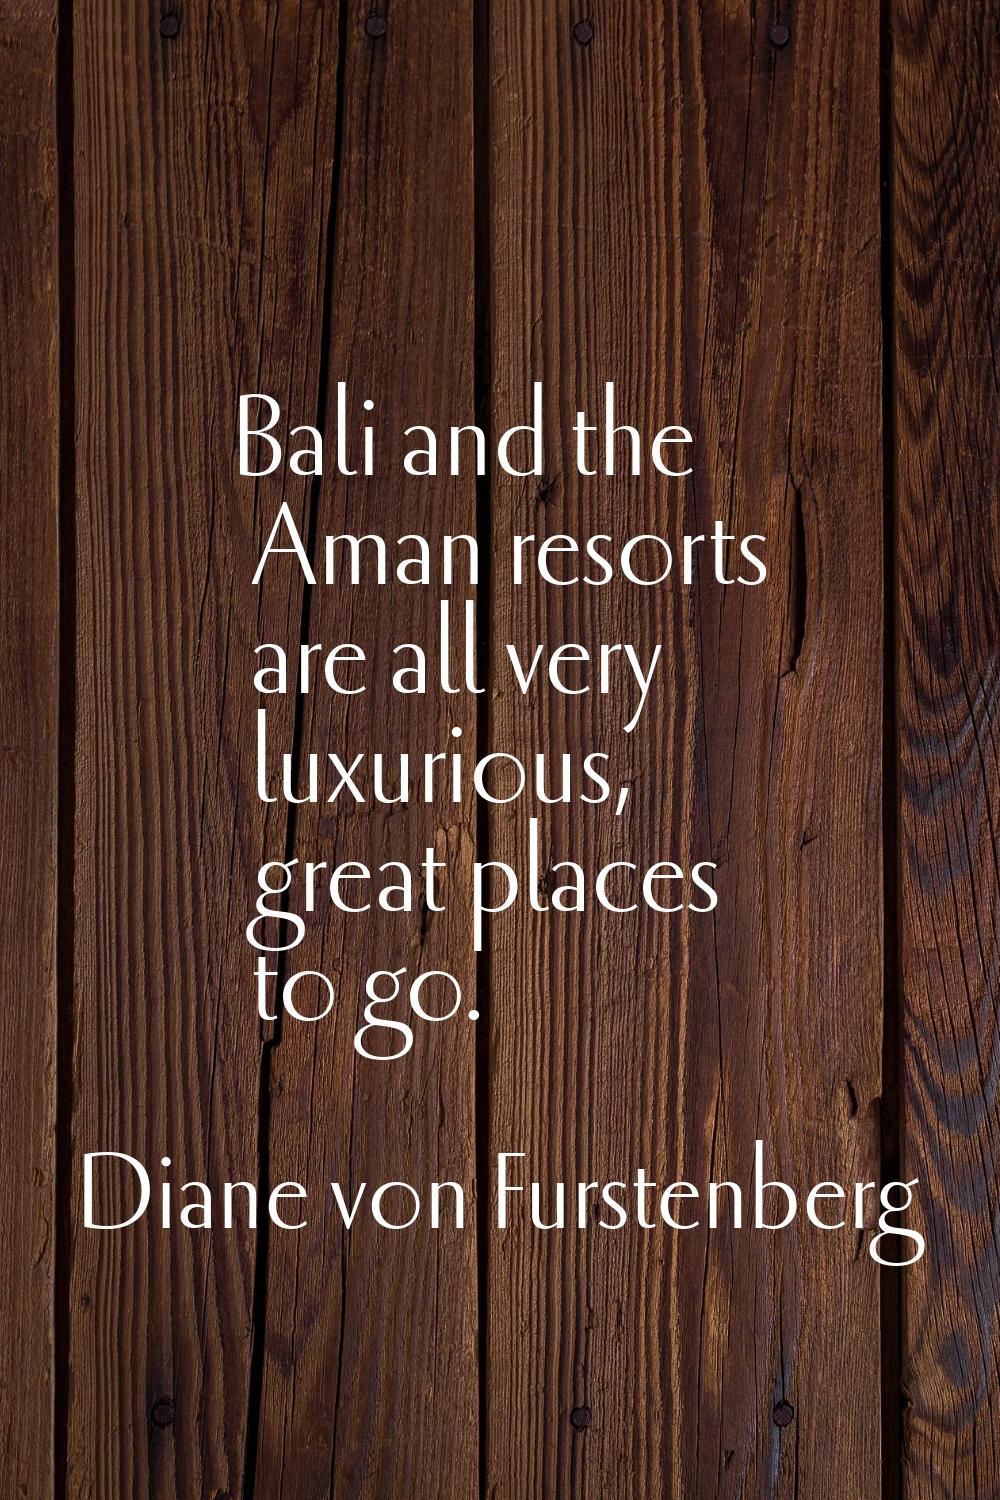 Bali and the Aman resorts are all very luxurious, great places to go.